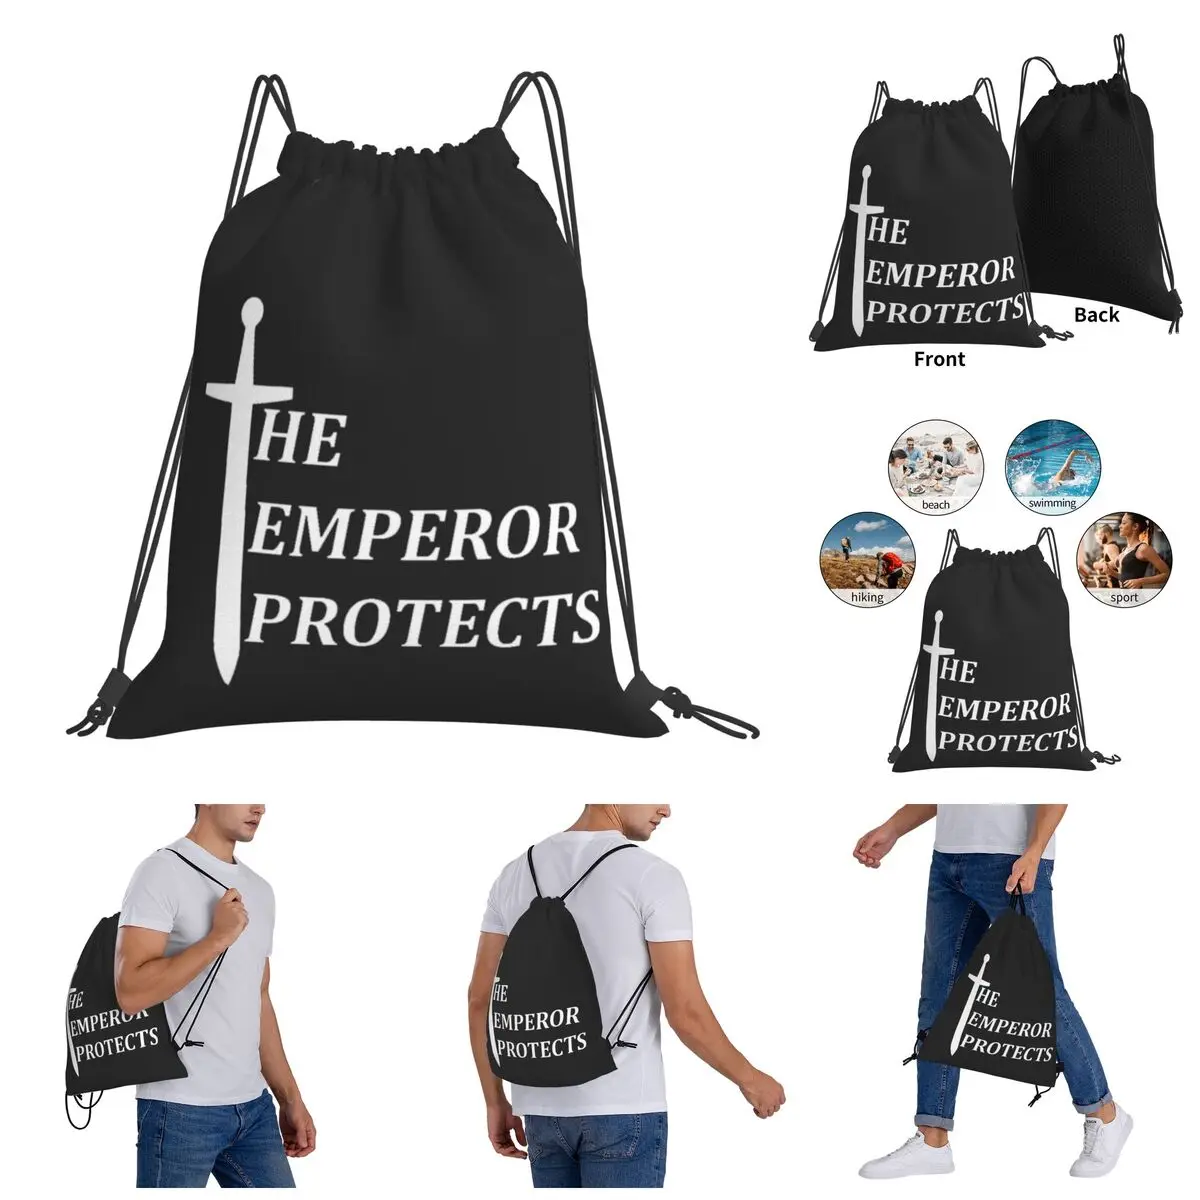 

Backpack Funny Novelty Drawstring Bags Gym Bag The Emperor Protects Essential 1 premium Blanket roll